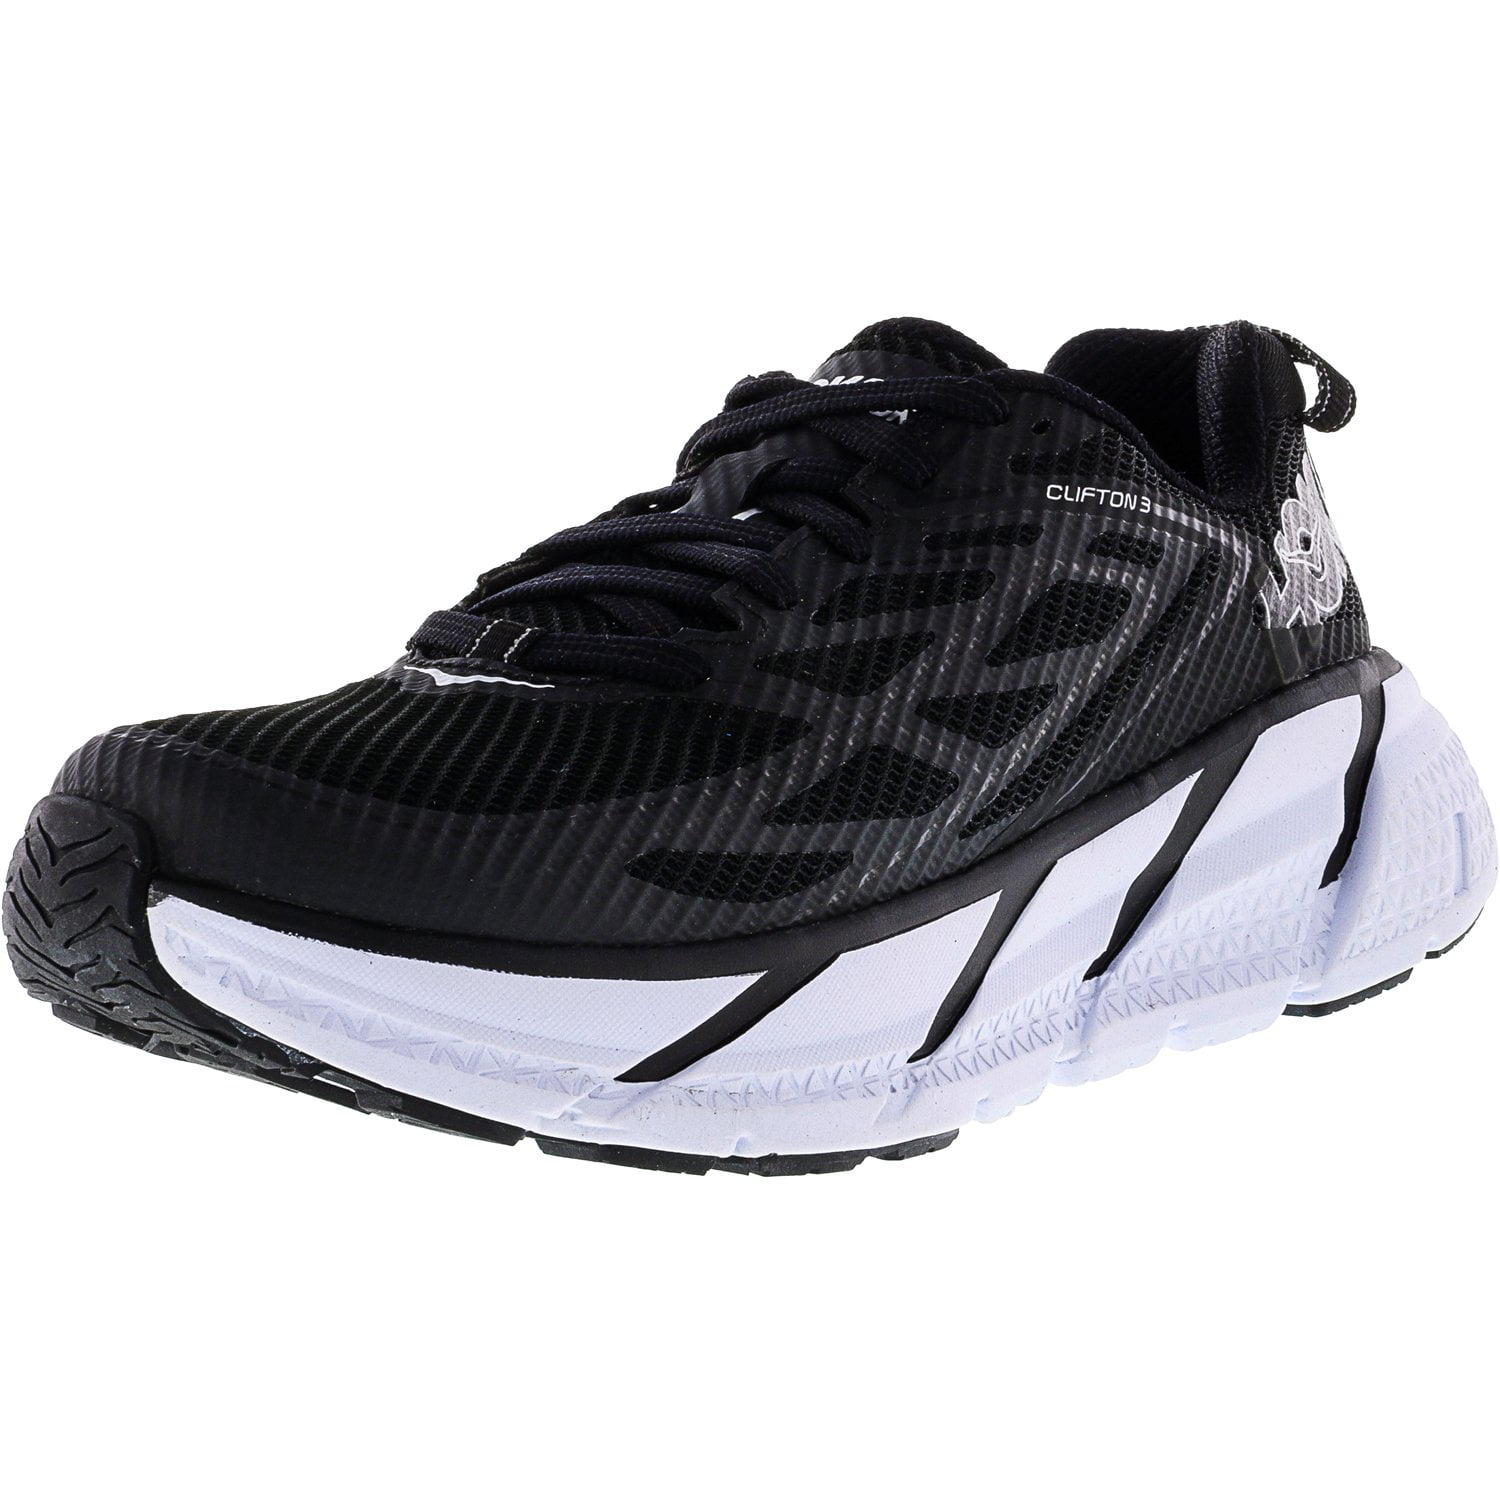 Hoka One Women's Clifton 3 Black / Anthracite Ankle-High Fabric Cross ...